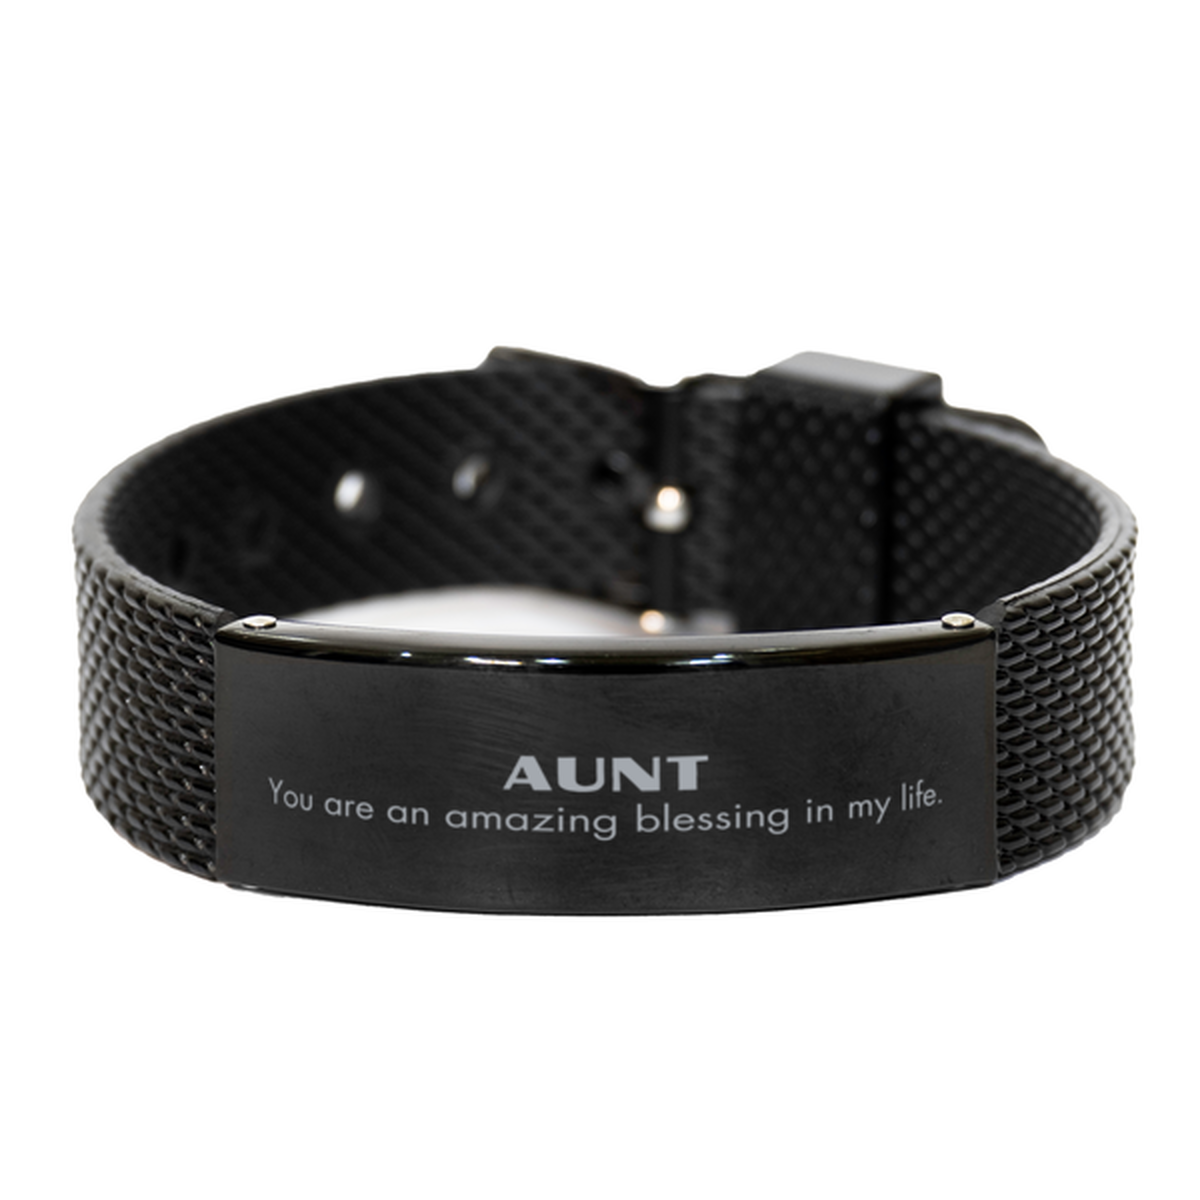 Aunt Black Shark Mesh Bracelet, You are an amazing blessing in my life, Thank You Gifts For Aunt, Inspirational Birthday Christmas Unique Gifts For Aunt